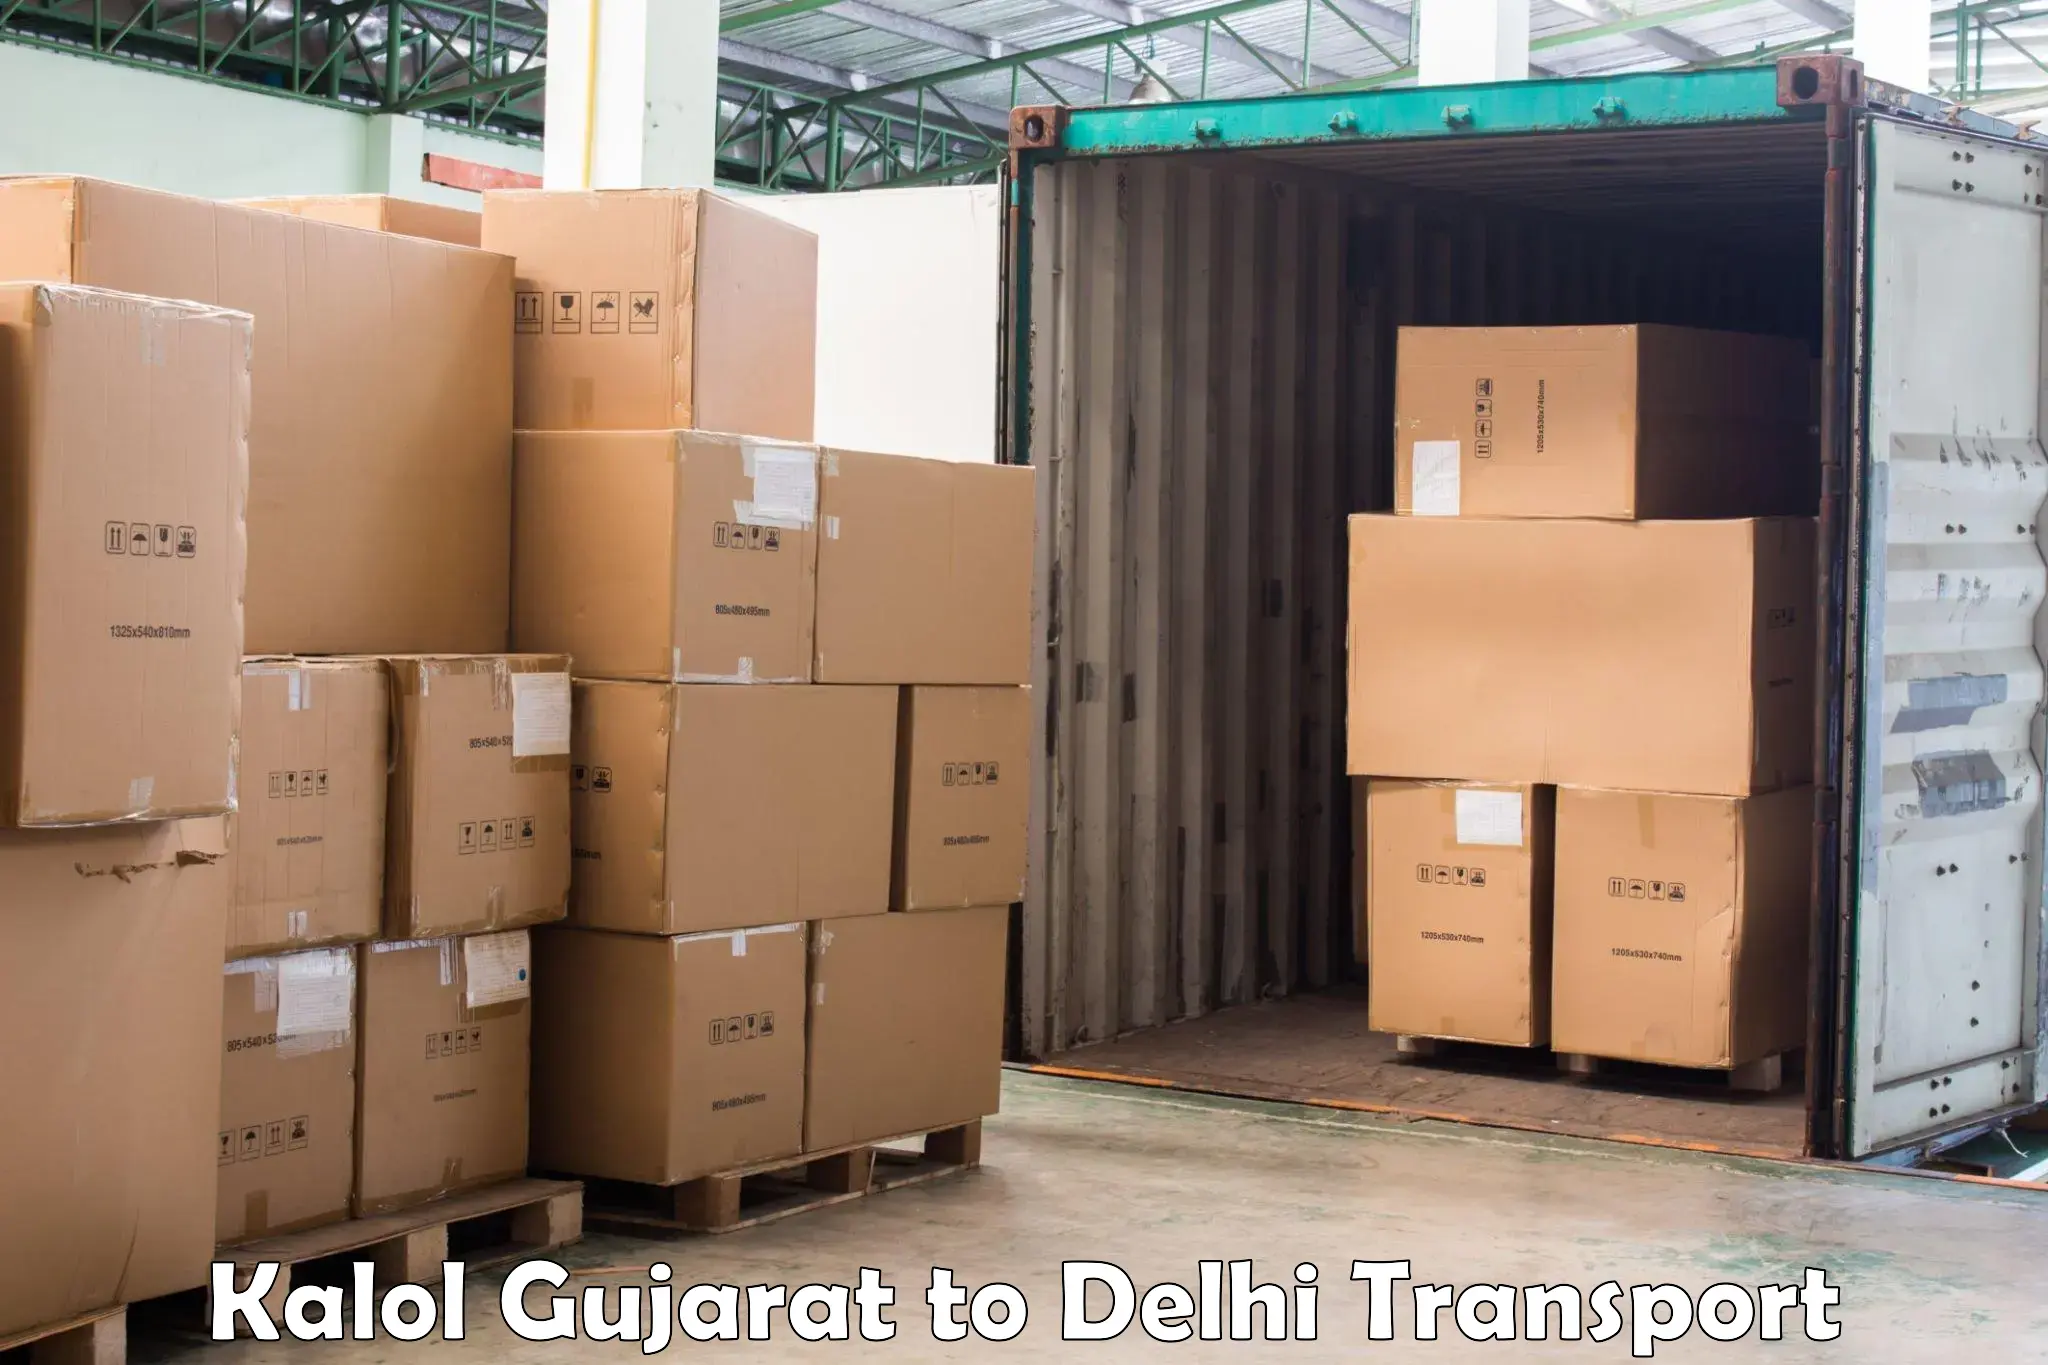 Transport bike from one state to another Kalol Gujarat to University of Delhi